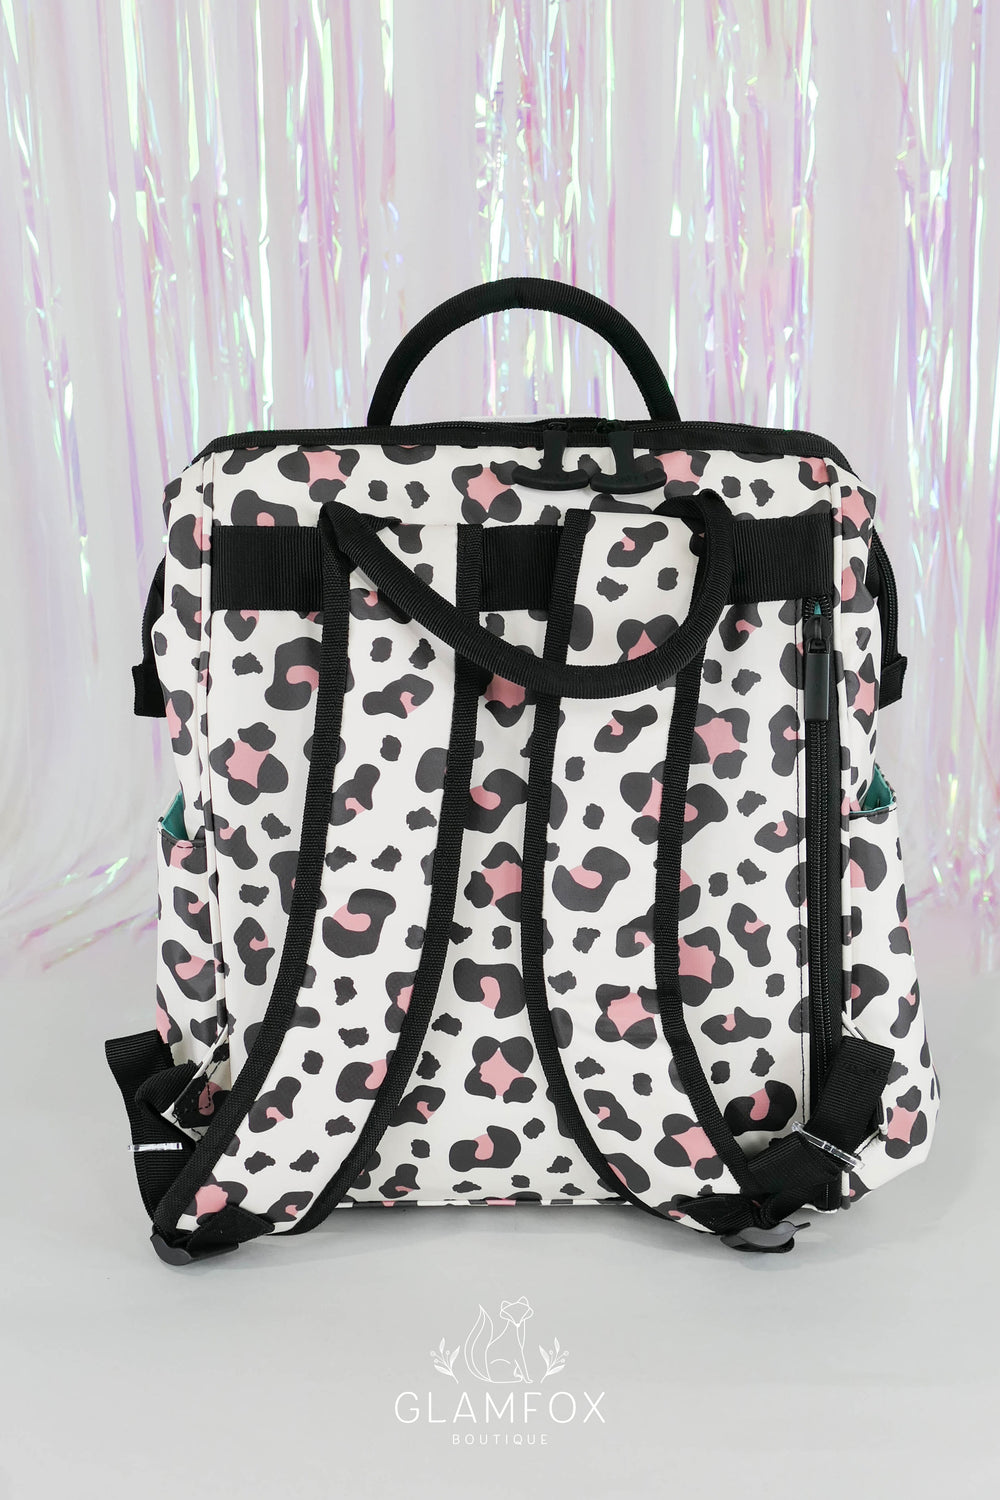 Swig Backpack Cooler - Luxy Leopard – Shop Heart and Home